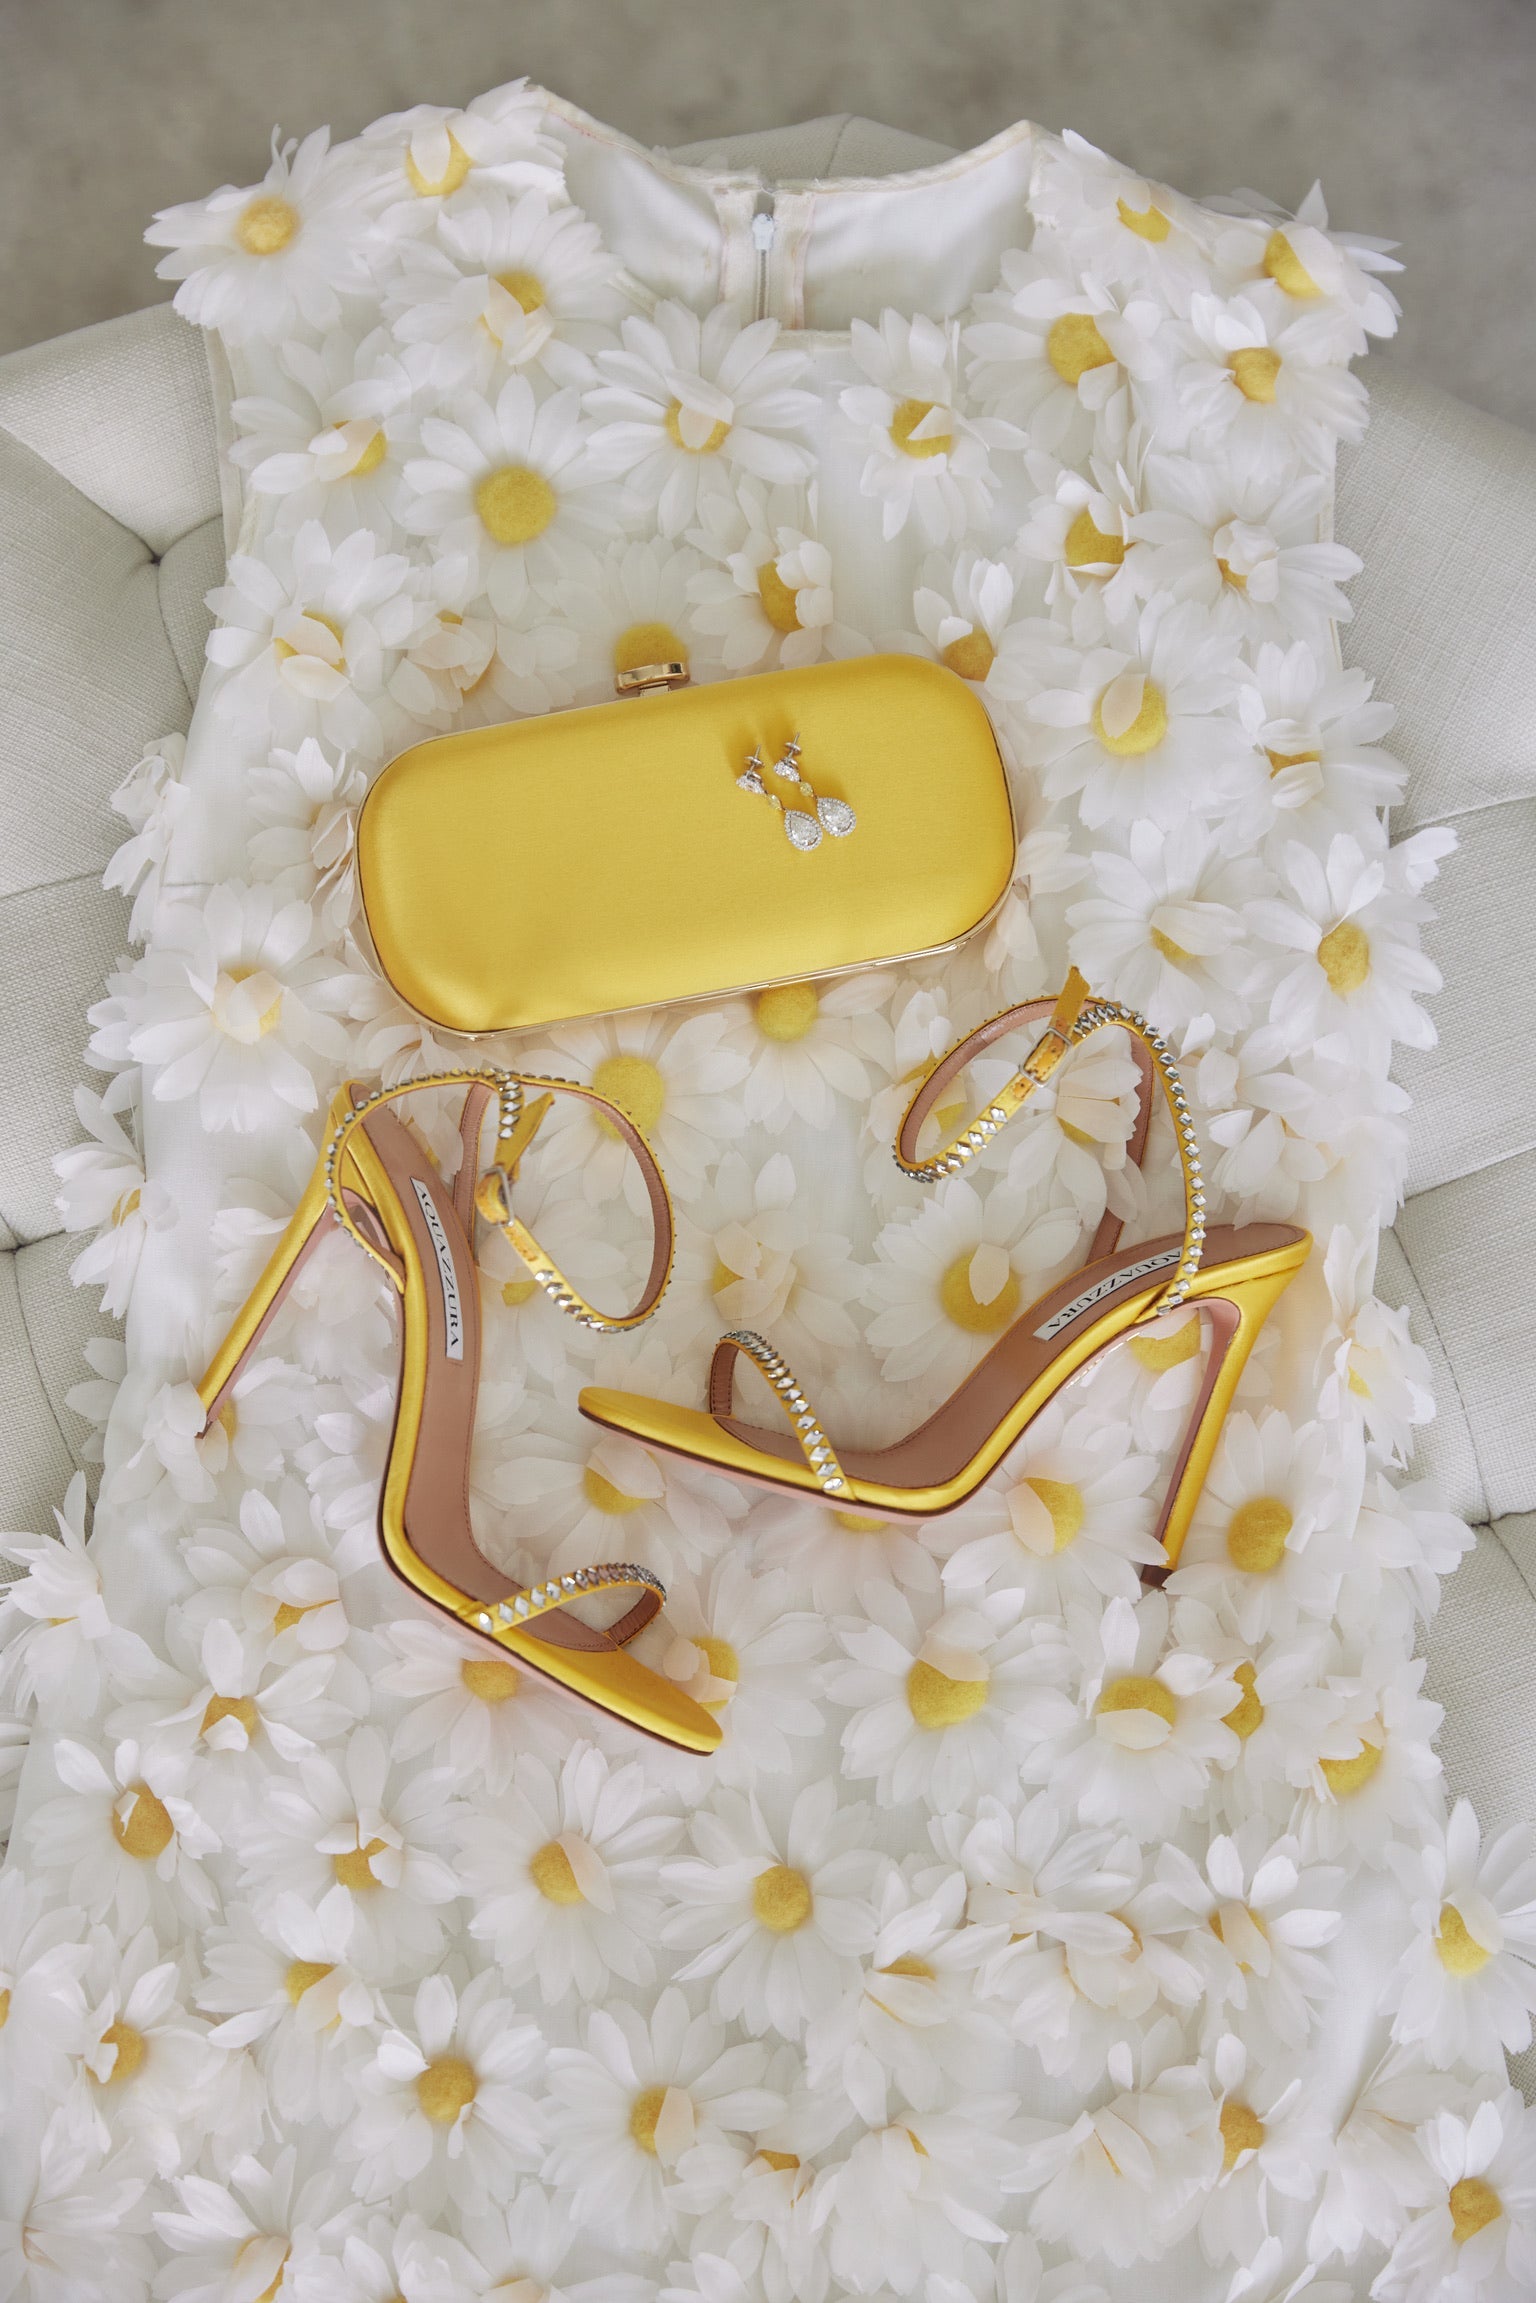 A dress, heels, and a Bella Rosa Collection Limoncello Yellow Petite Clutch adorned with rhinestones, displayed on a bed of white flowers.